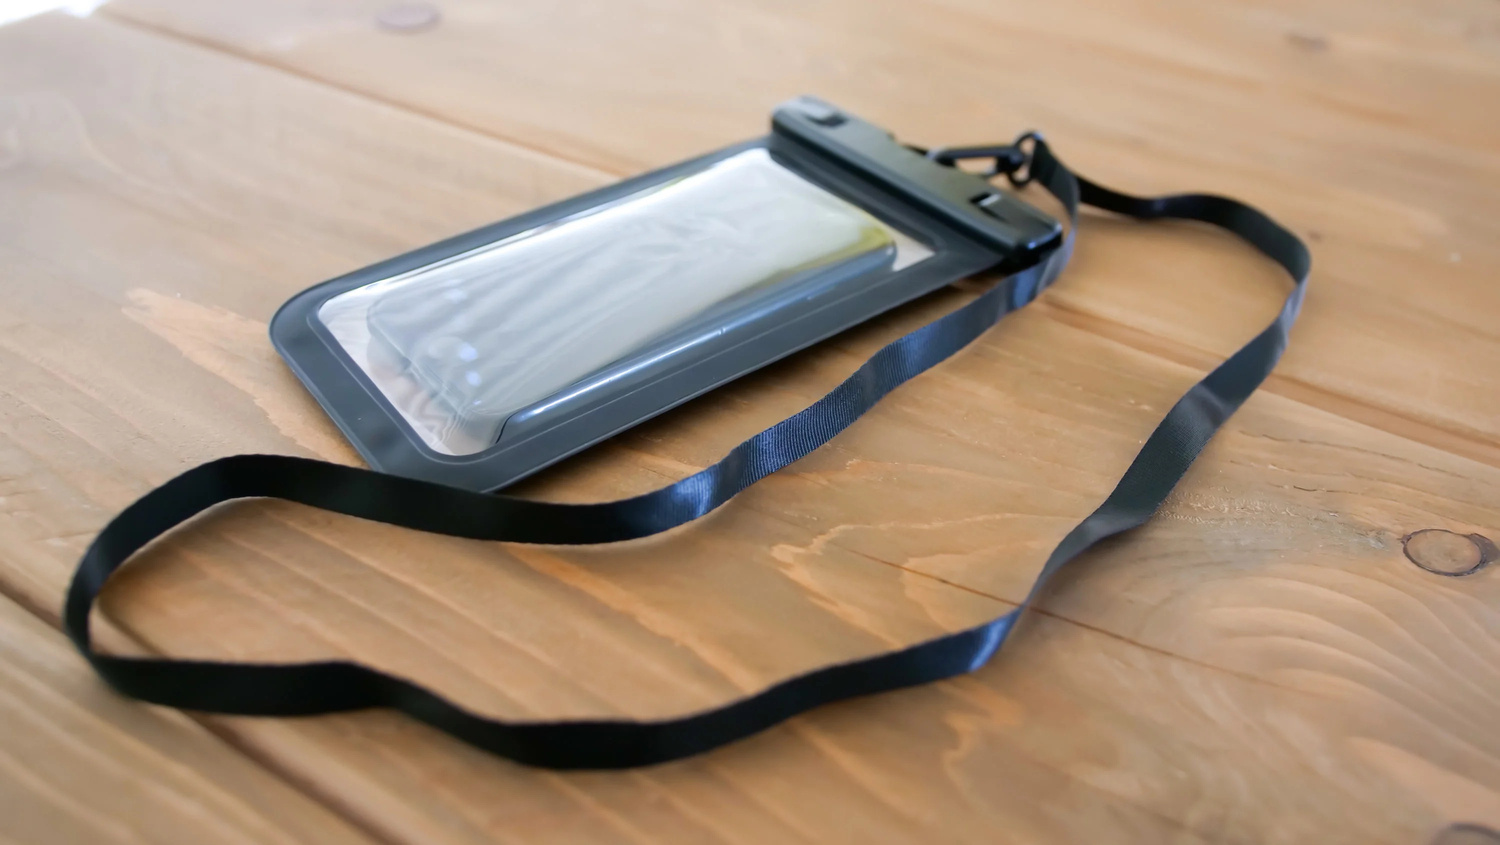 Securing Your Waterproof Phone Bag: Attaching A Lanyard